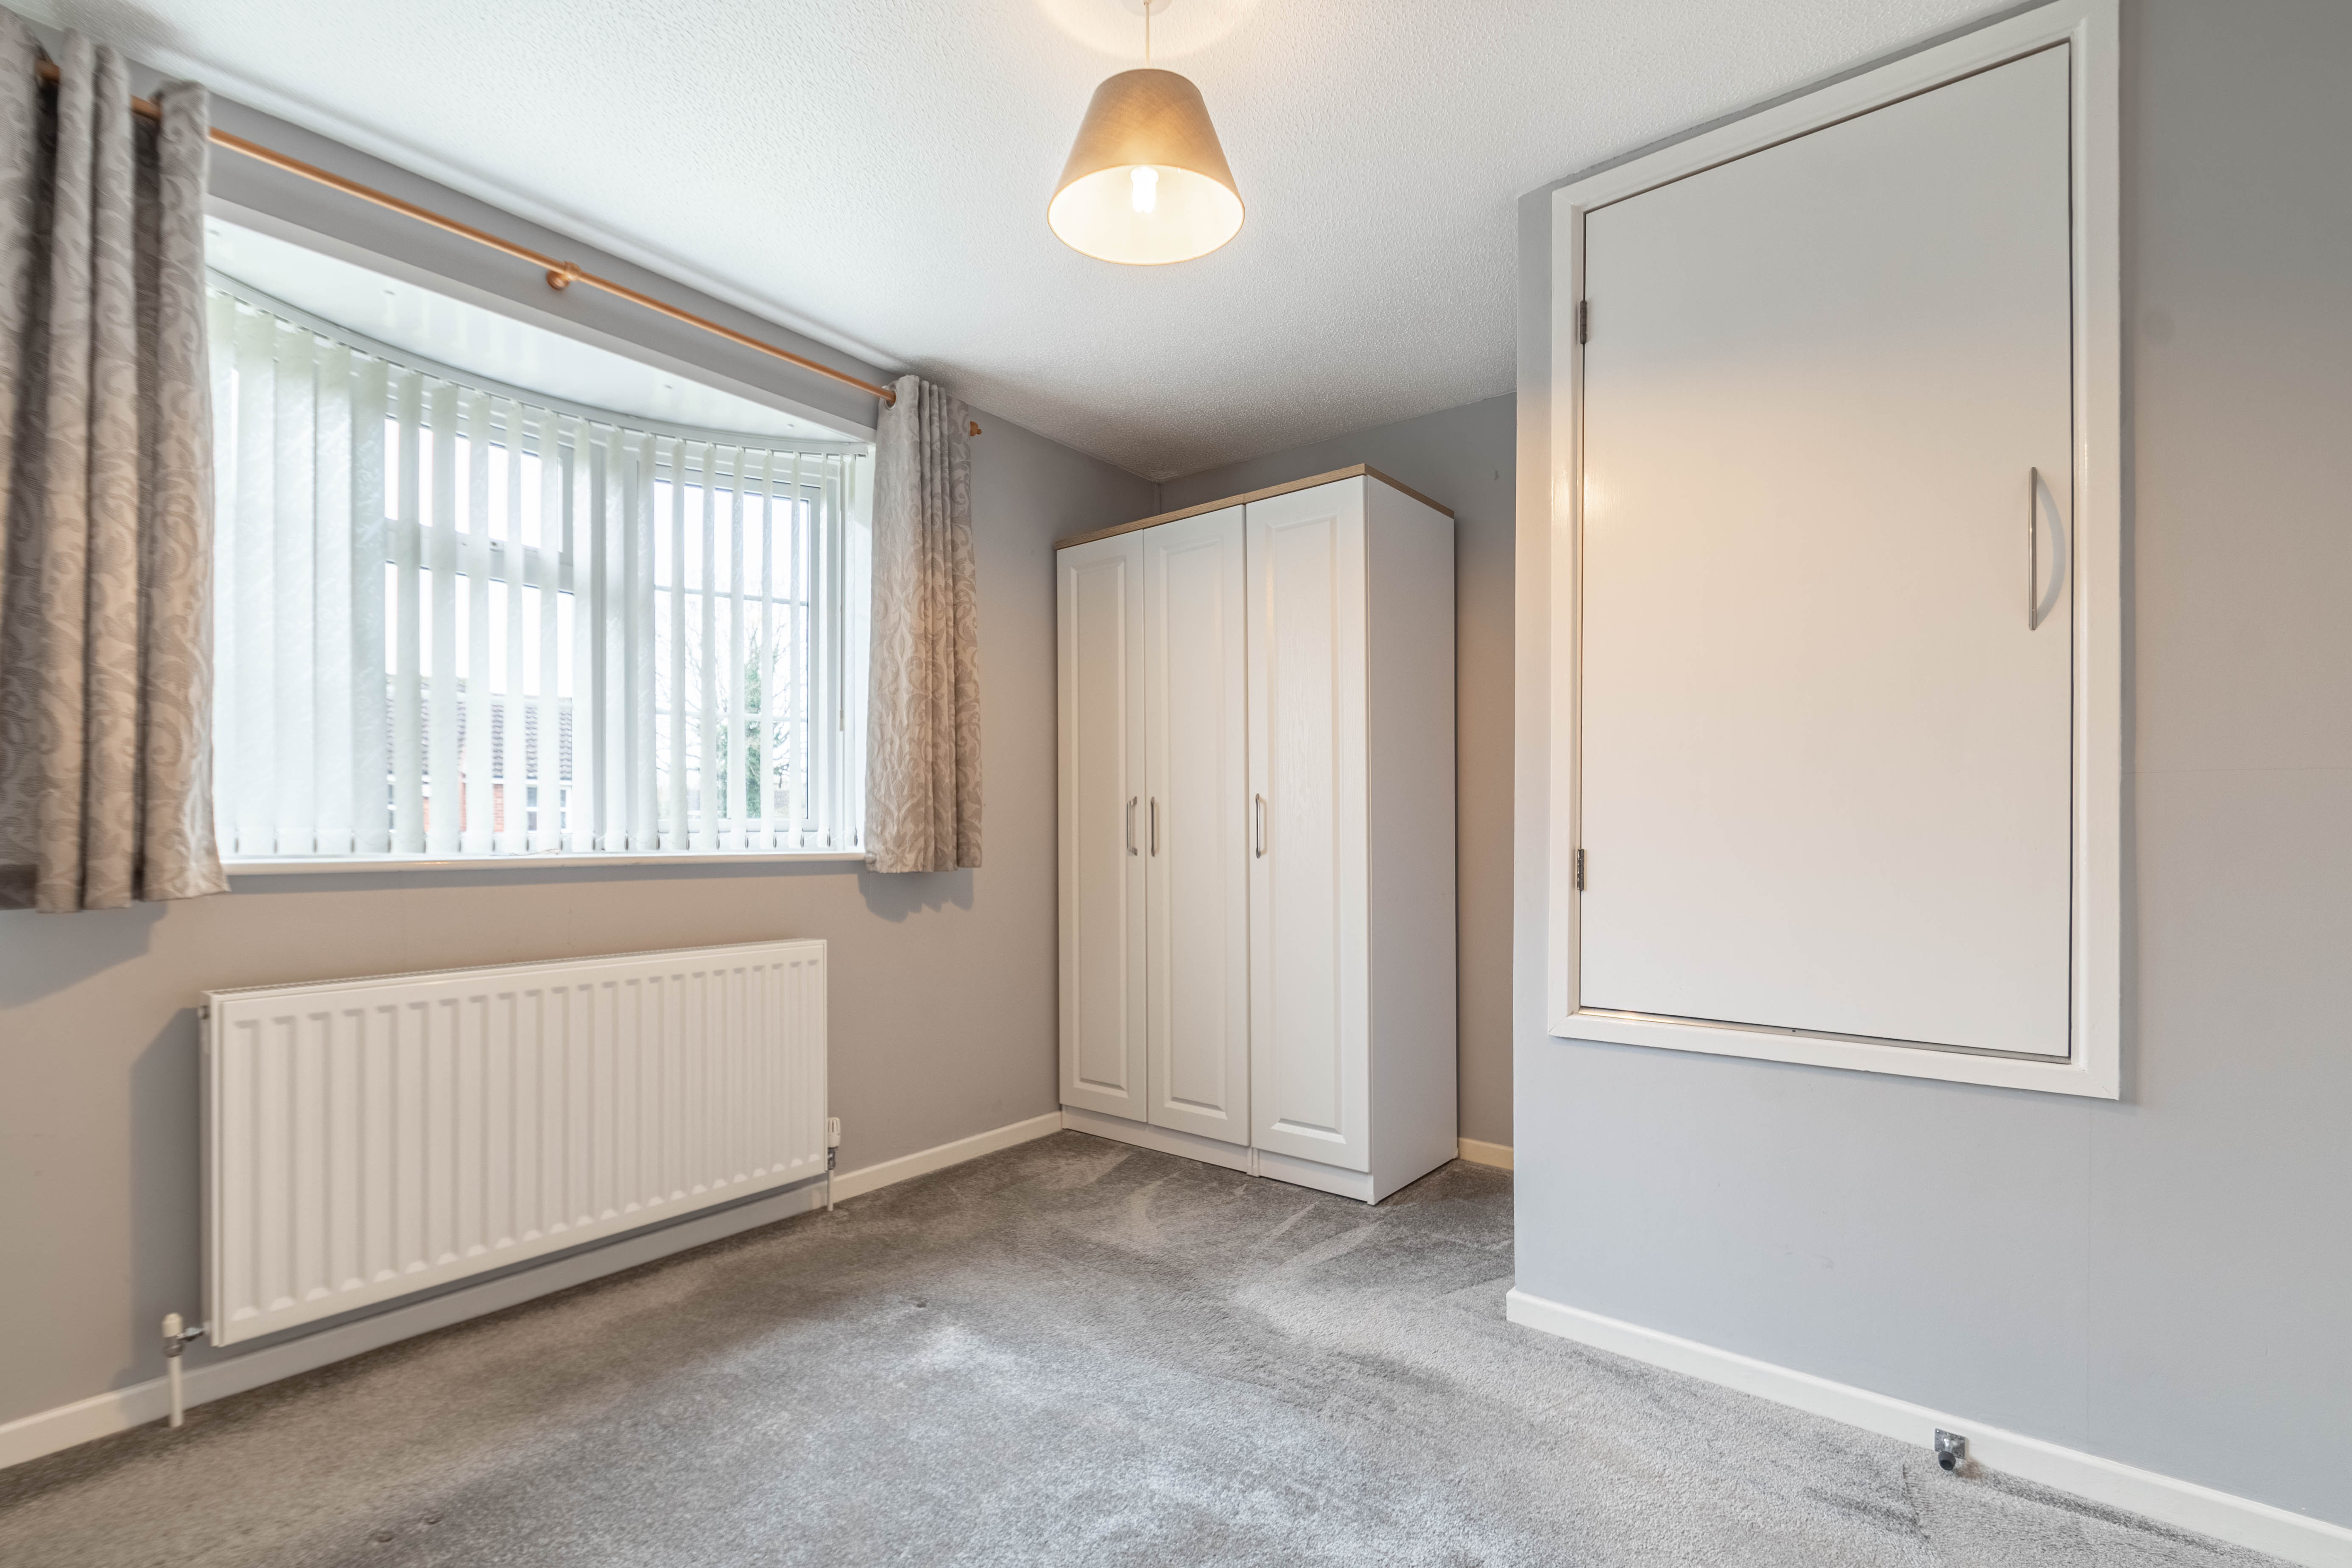 2 bed house for sale in Abbotswood Close, Winyates Green 7